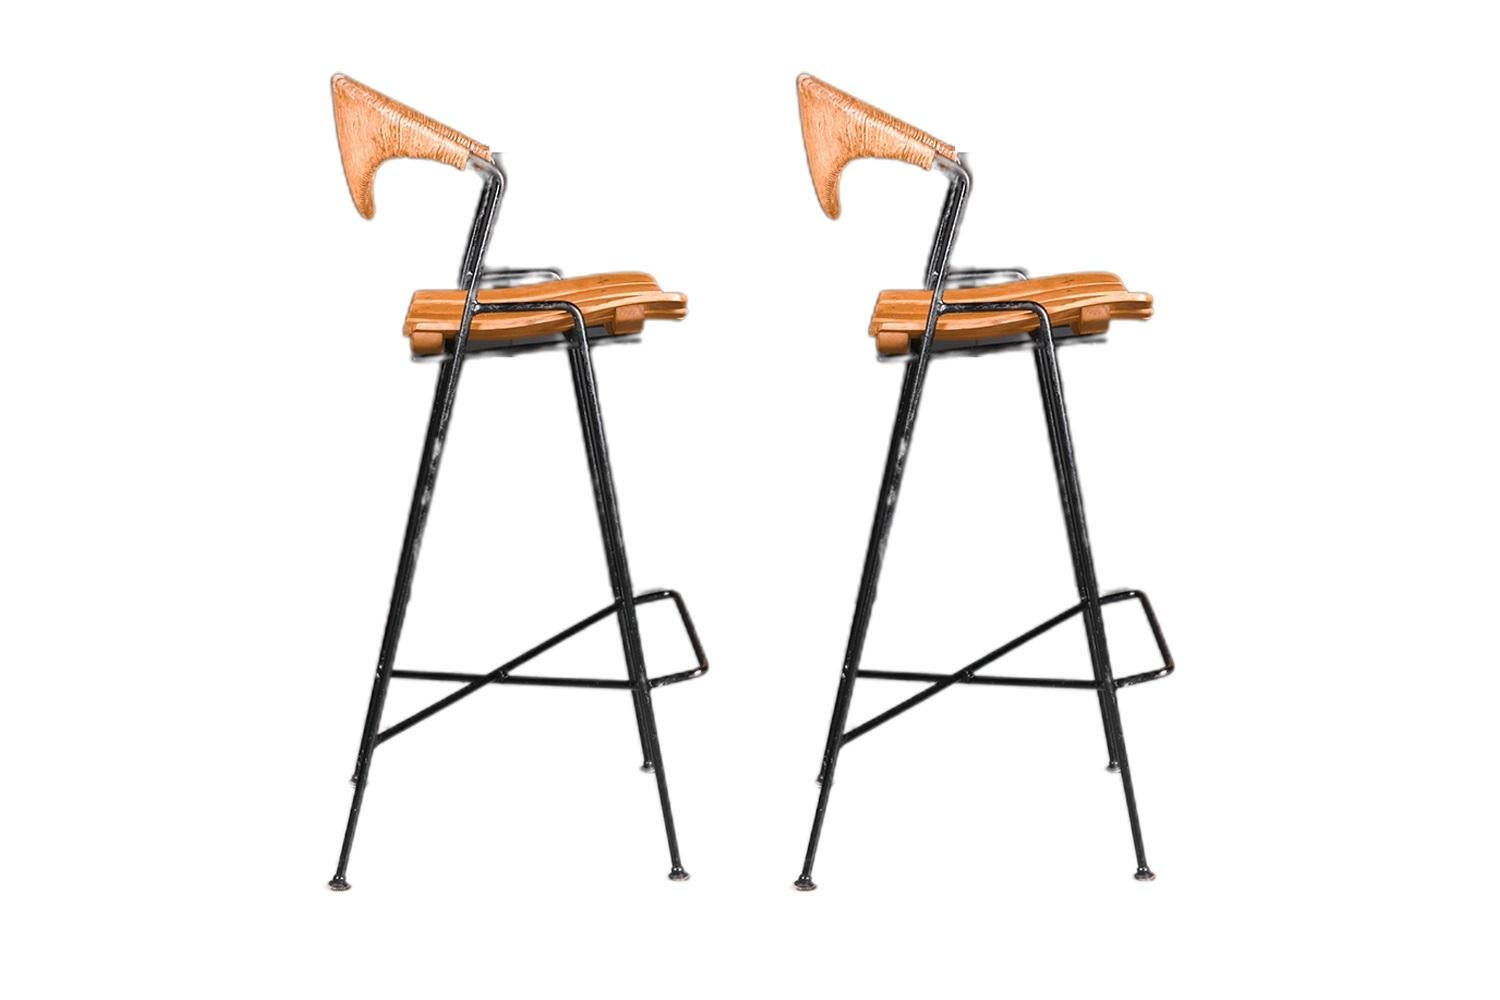 A Pair of Mid Century paper cord and slat seat bar height stools, with very thin iron bases, designed by Arthur Umanoff for Shaver Howard each remain in original condition throughout. Features stylish, sculptural, curved paper cord backrests in a